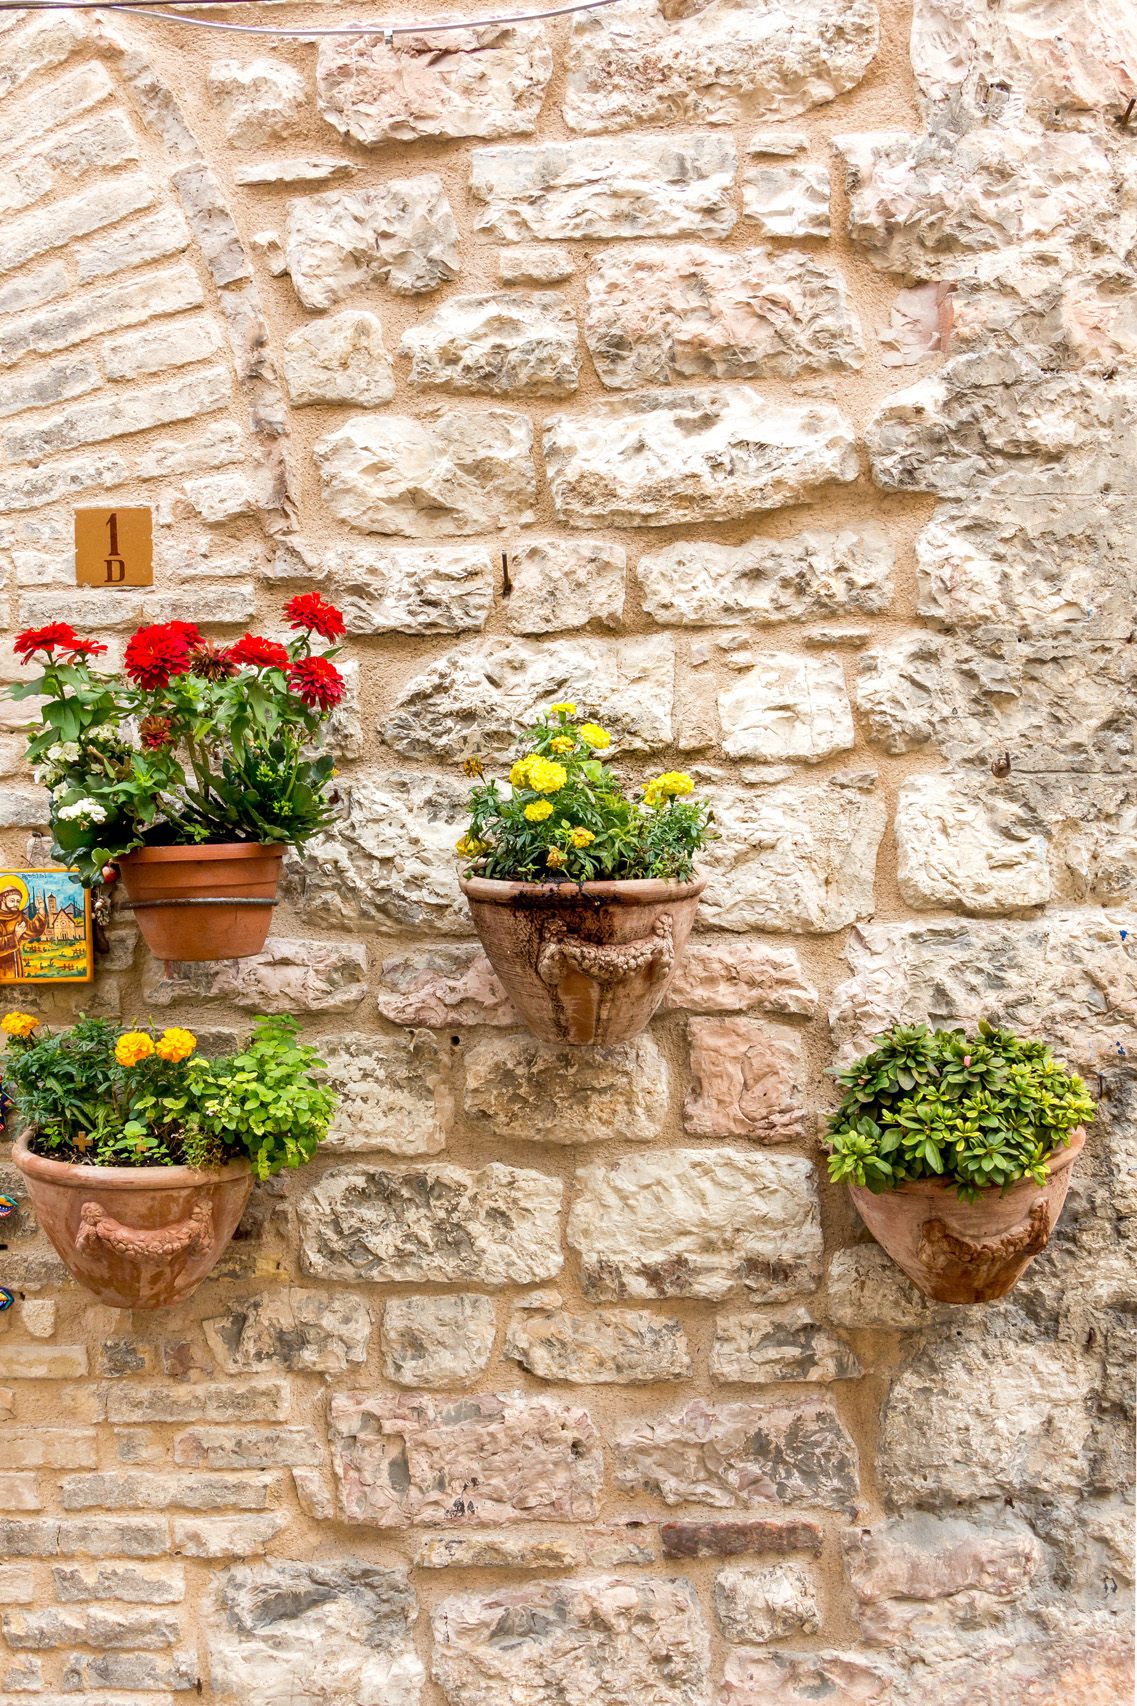 Flower pots in Assisi, Italy